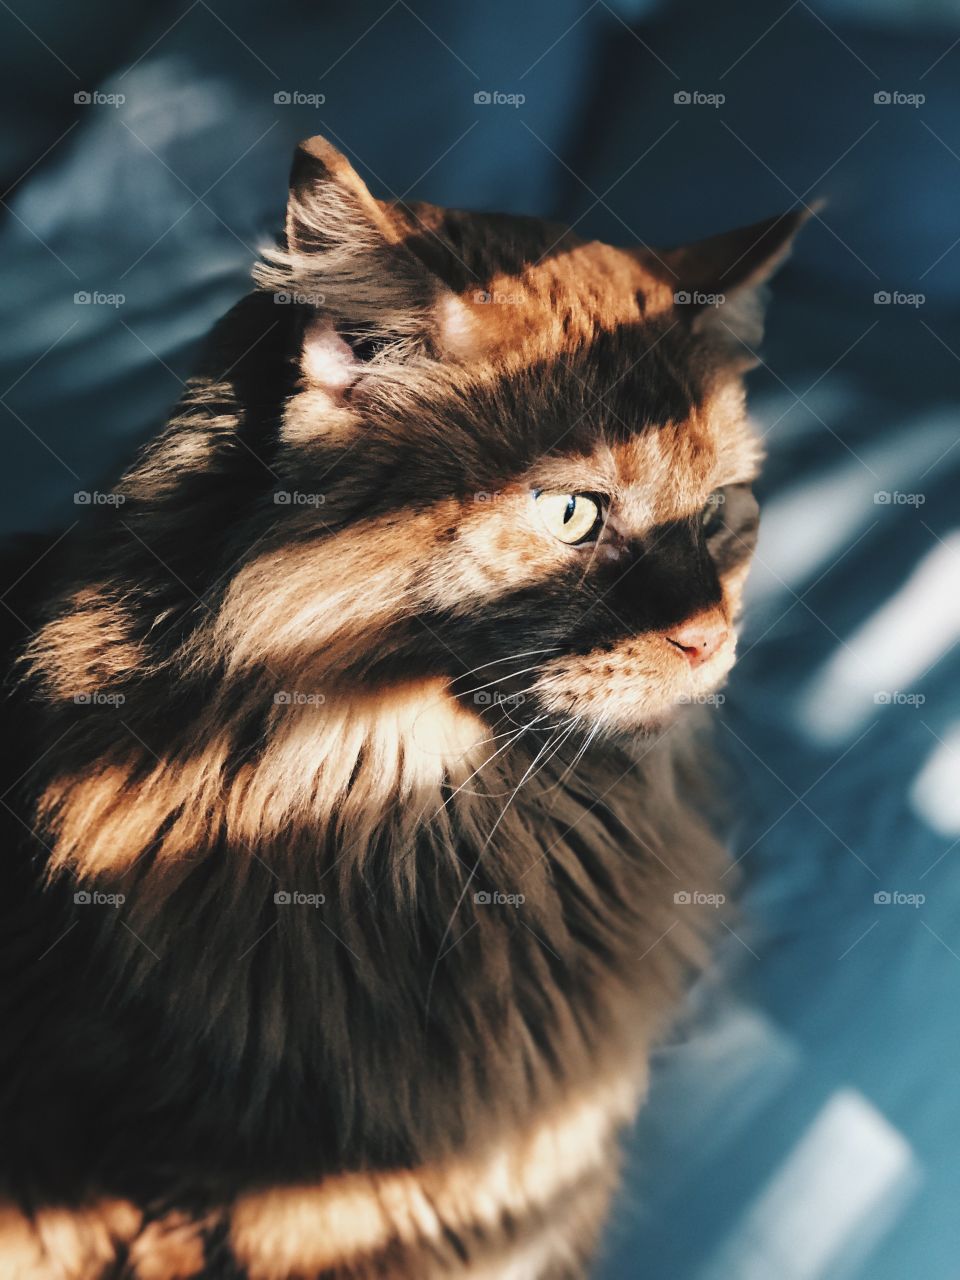 Orange Maine Coon cat with sun light on eyes through a window and blinds. 